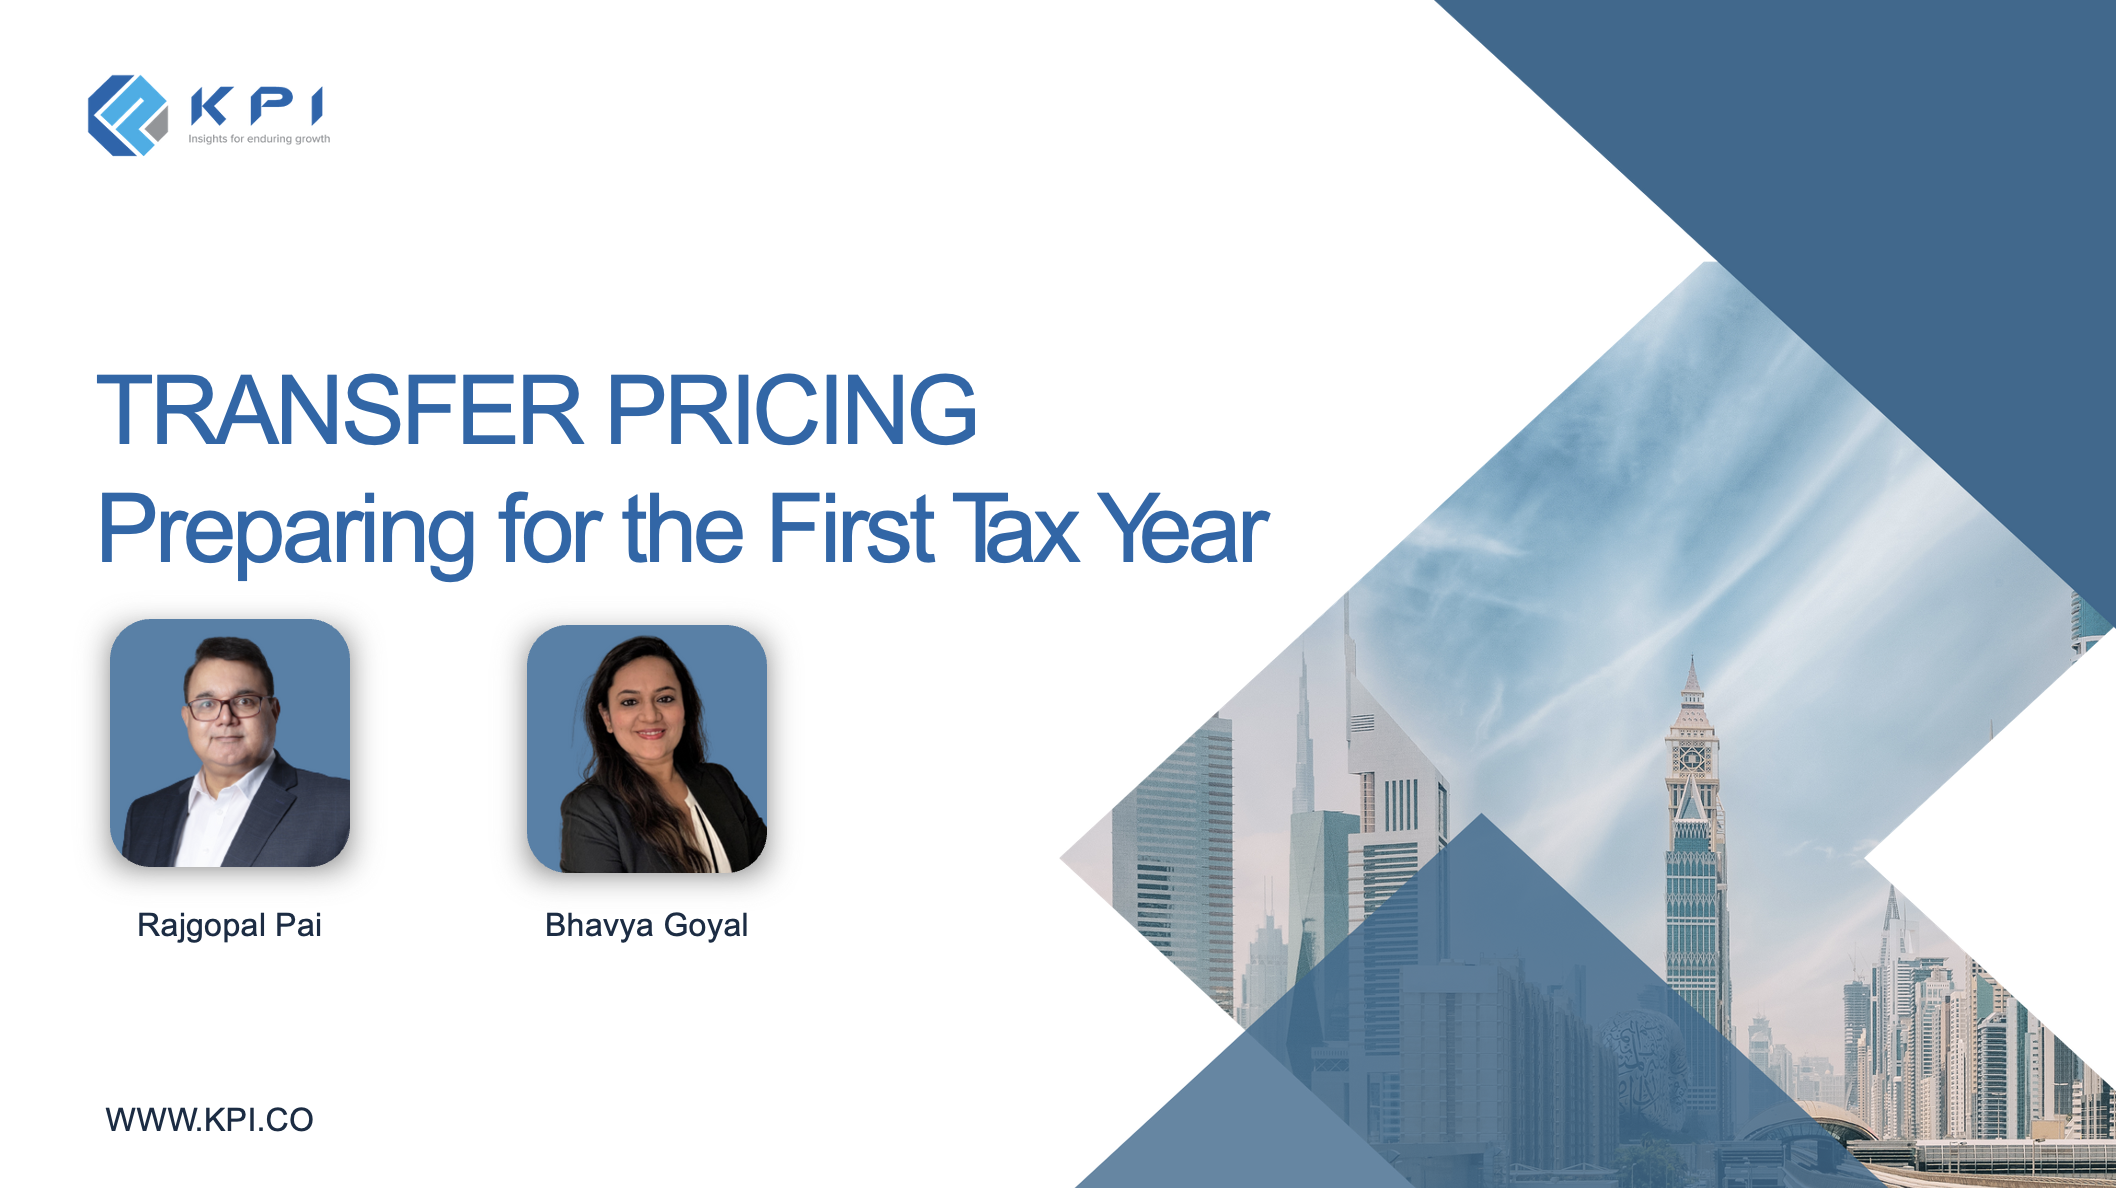 Transfer Pricing - Preparing for the Tax Year